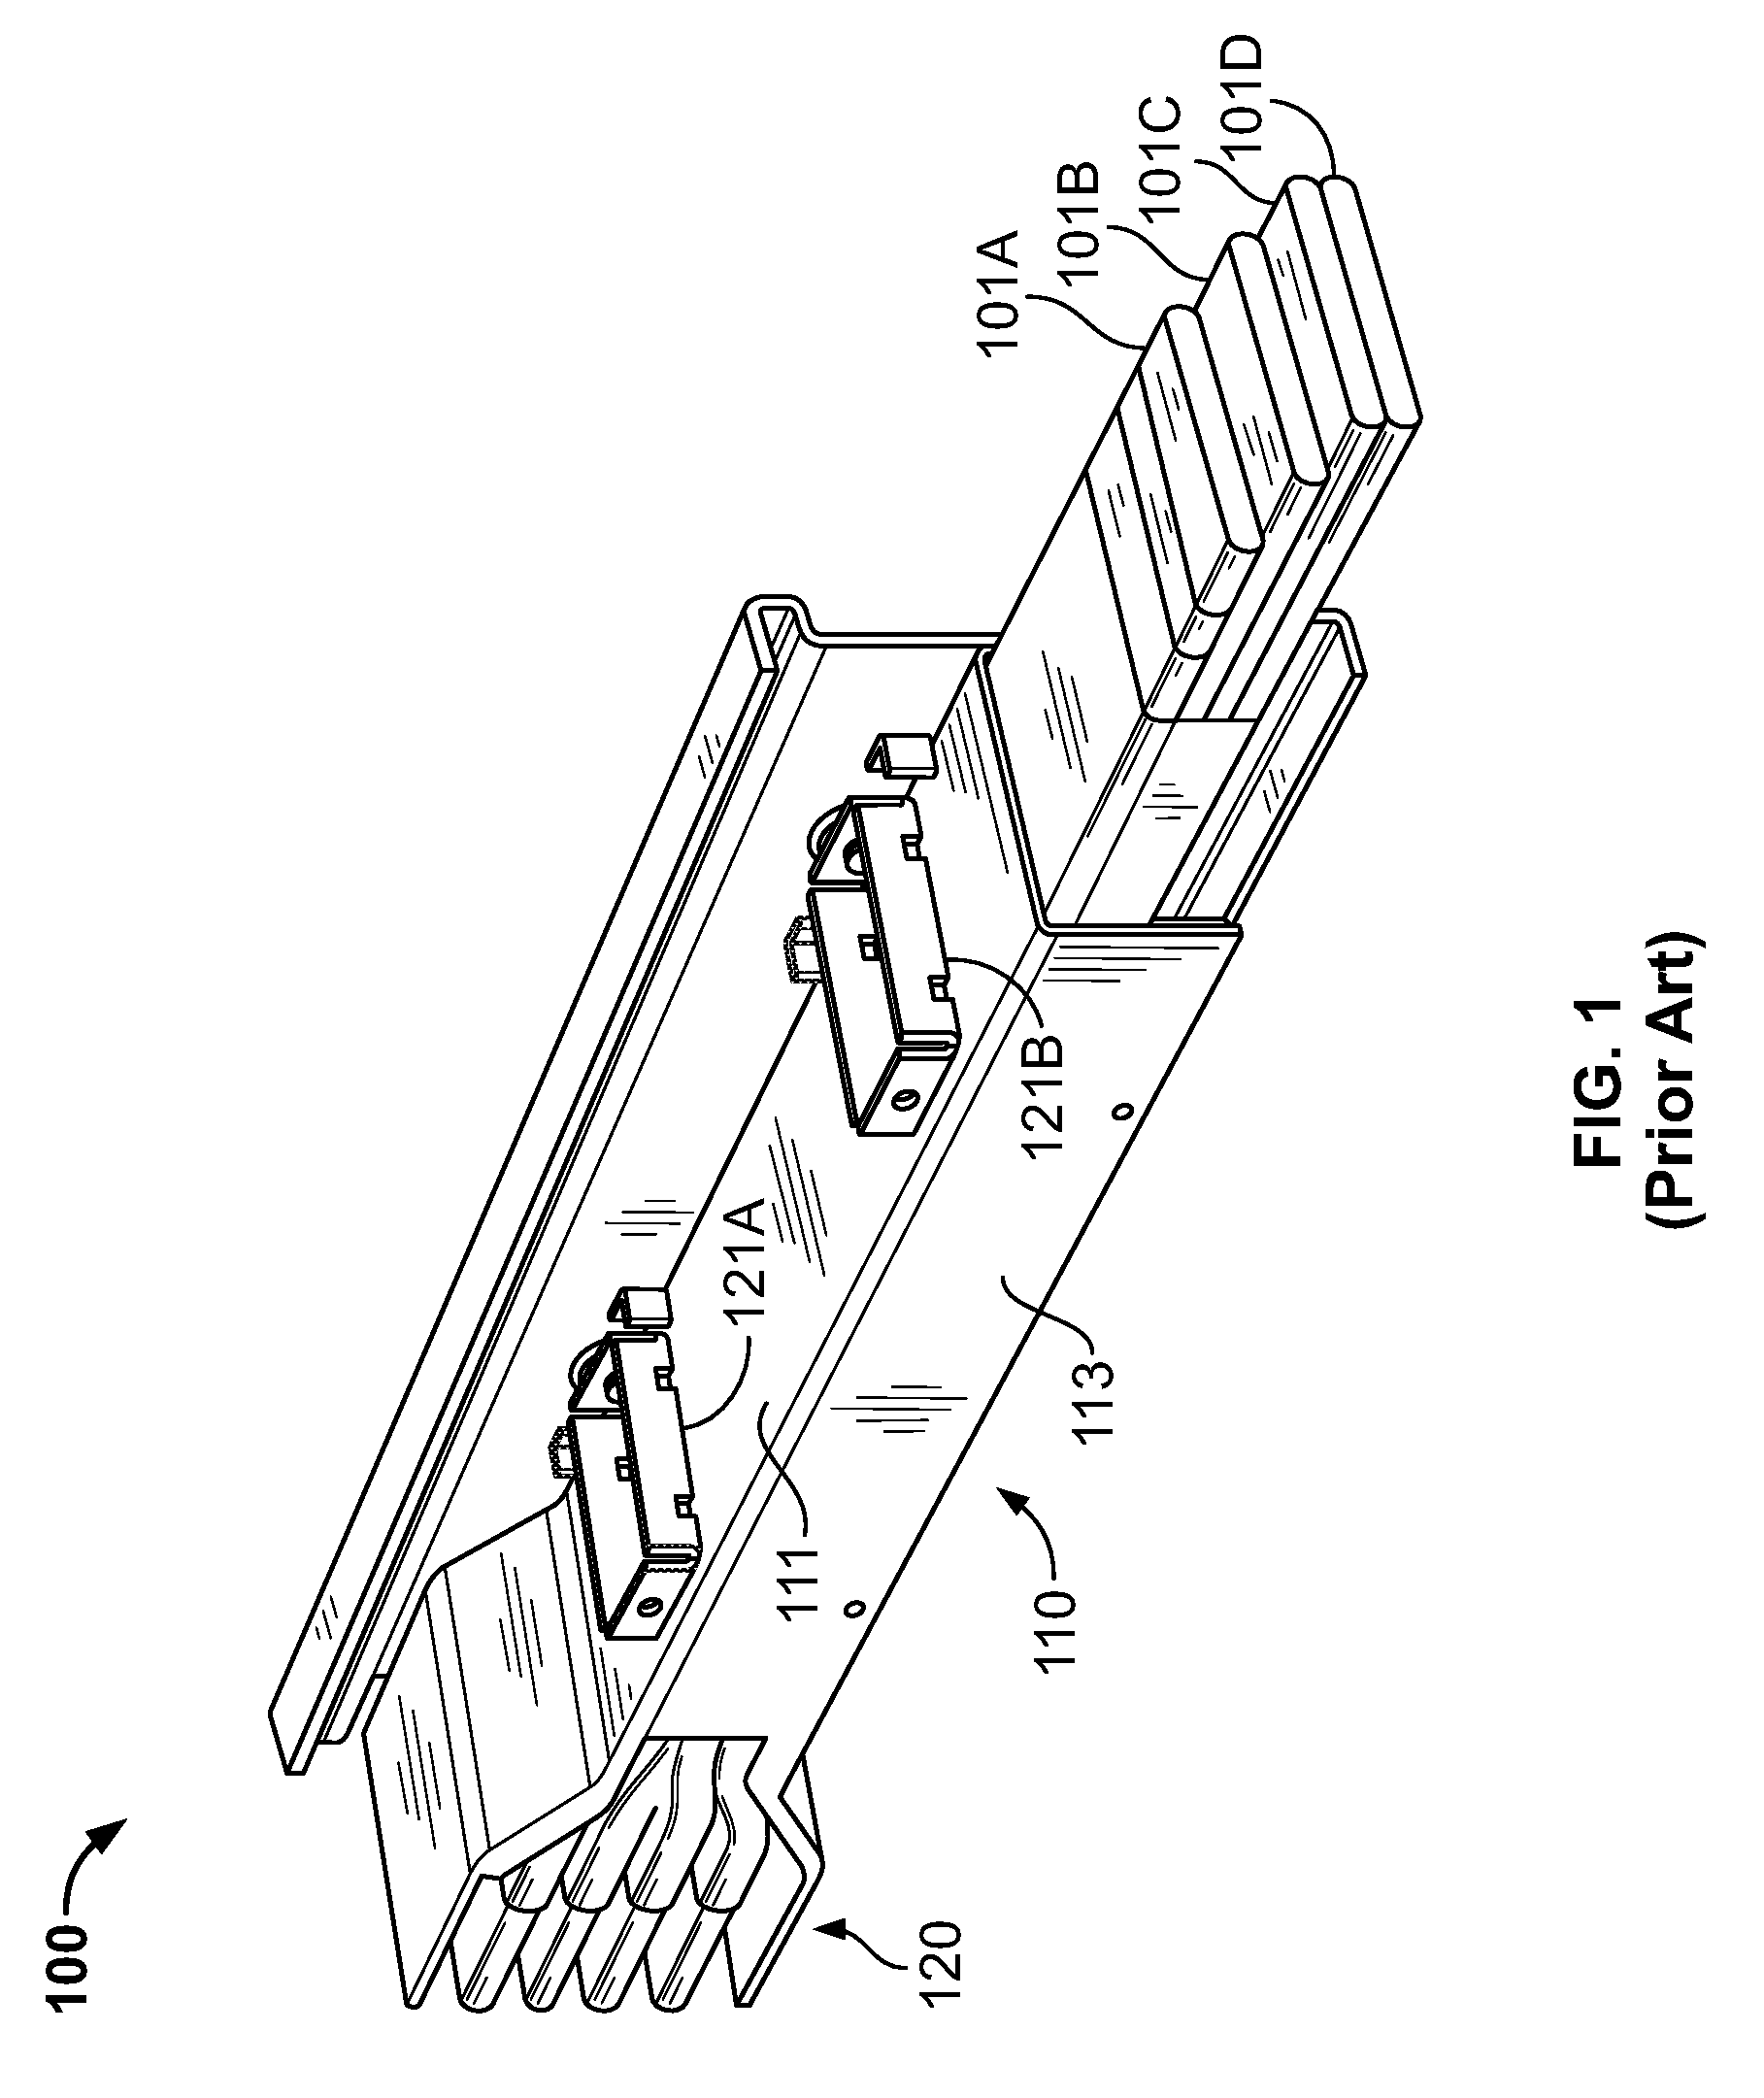 Insulation of busbars using insulating members having corrugated sections